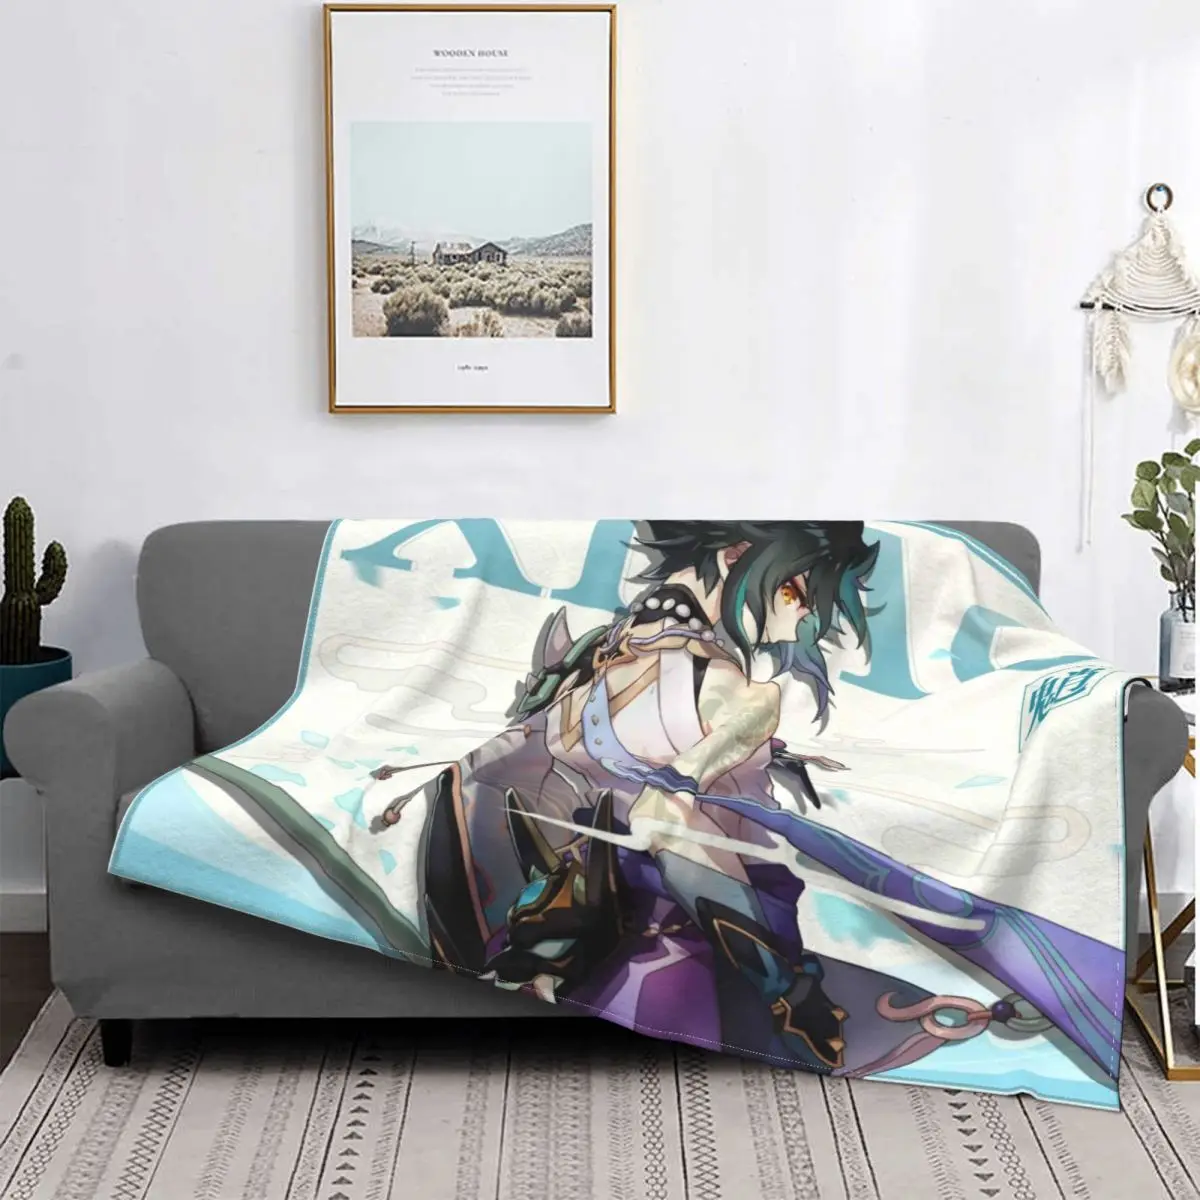 Xiao Genshin Impact Blankets Velvet Autumn/Winter Game Multi-function Soft Throw Blanket for Home Couch Rug Piece